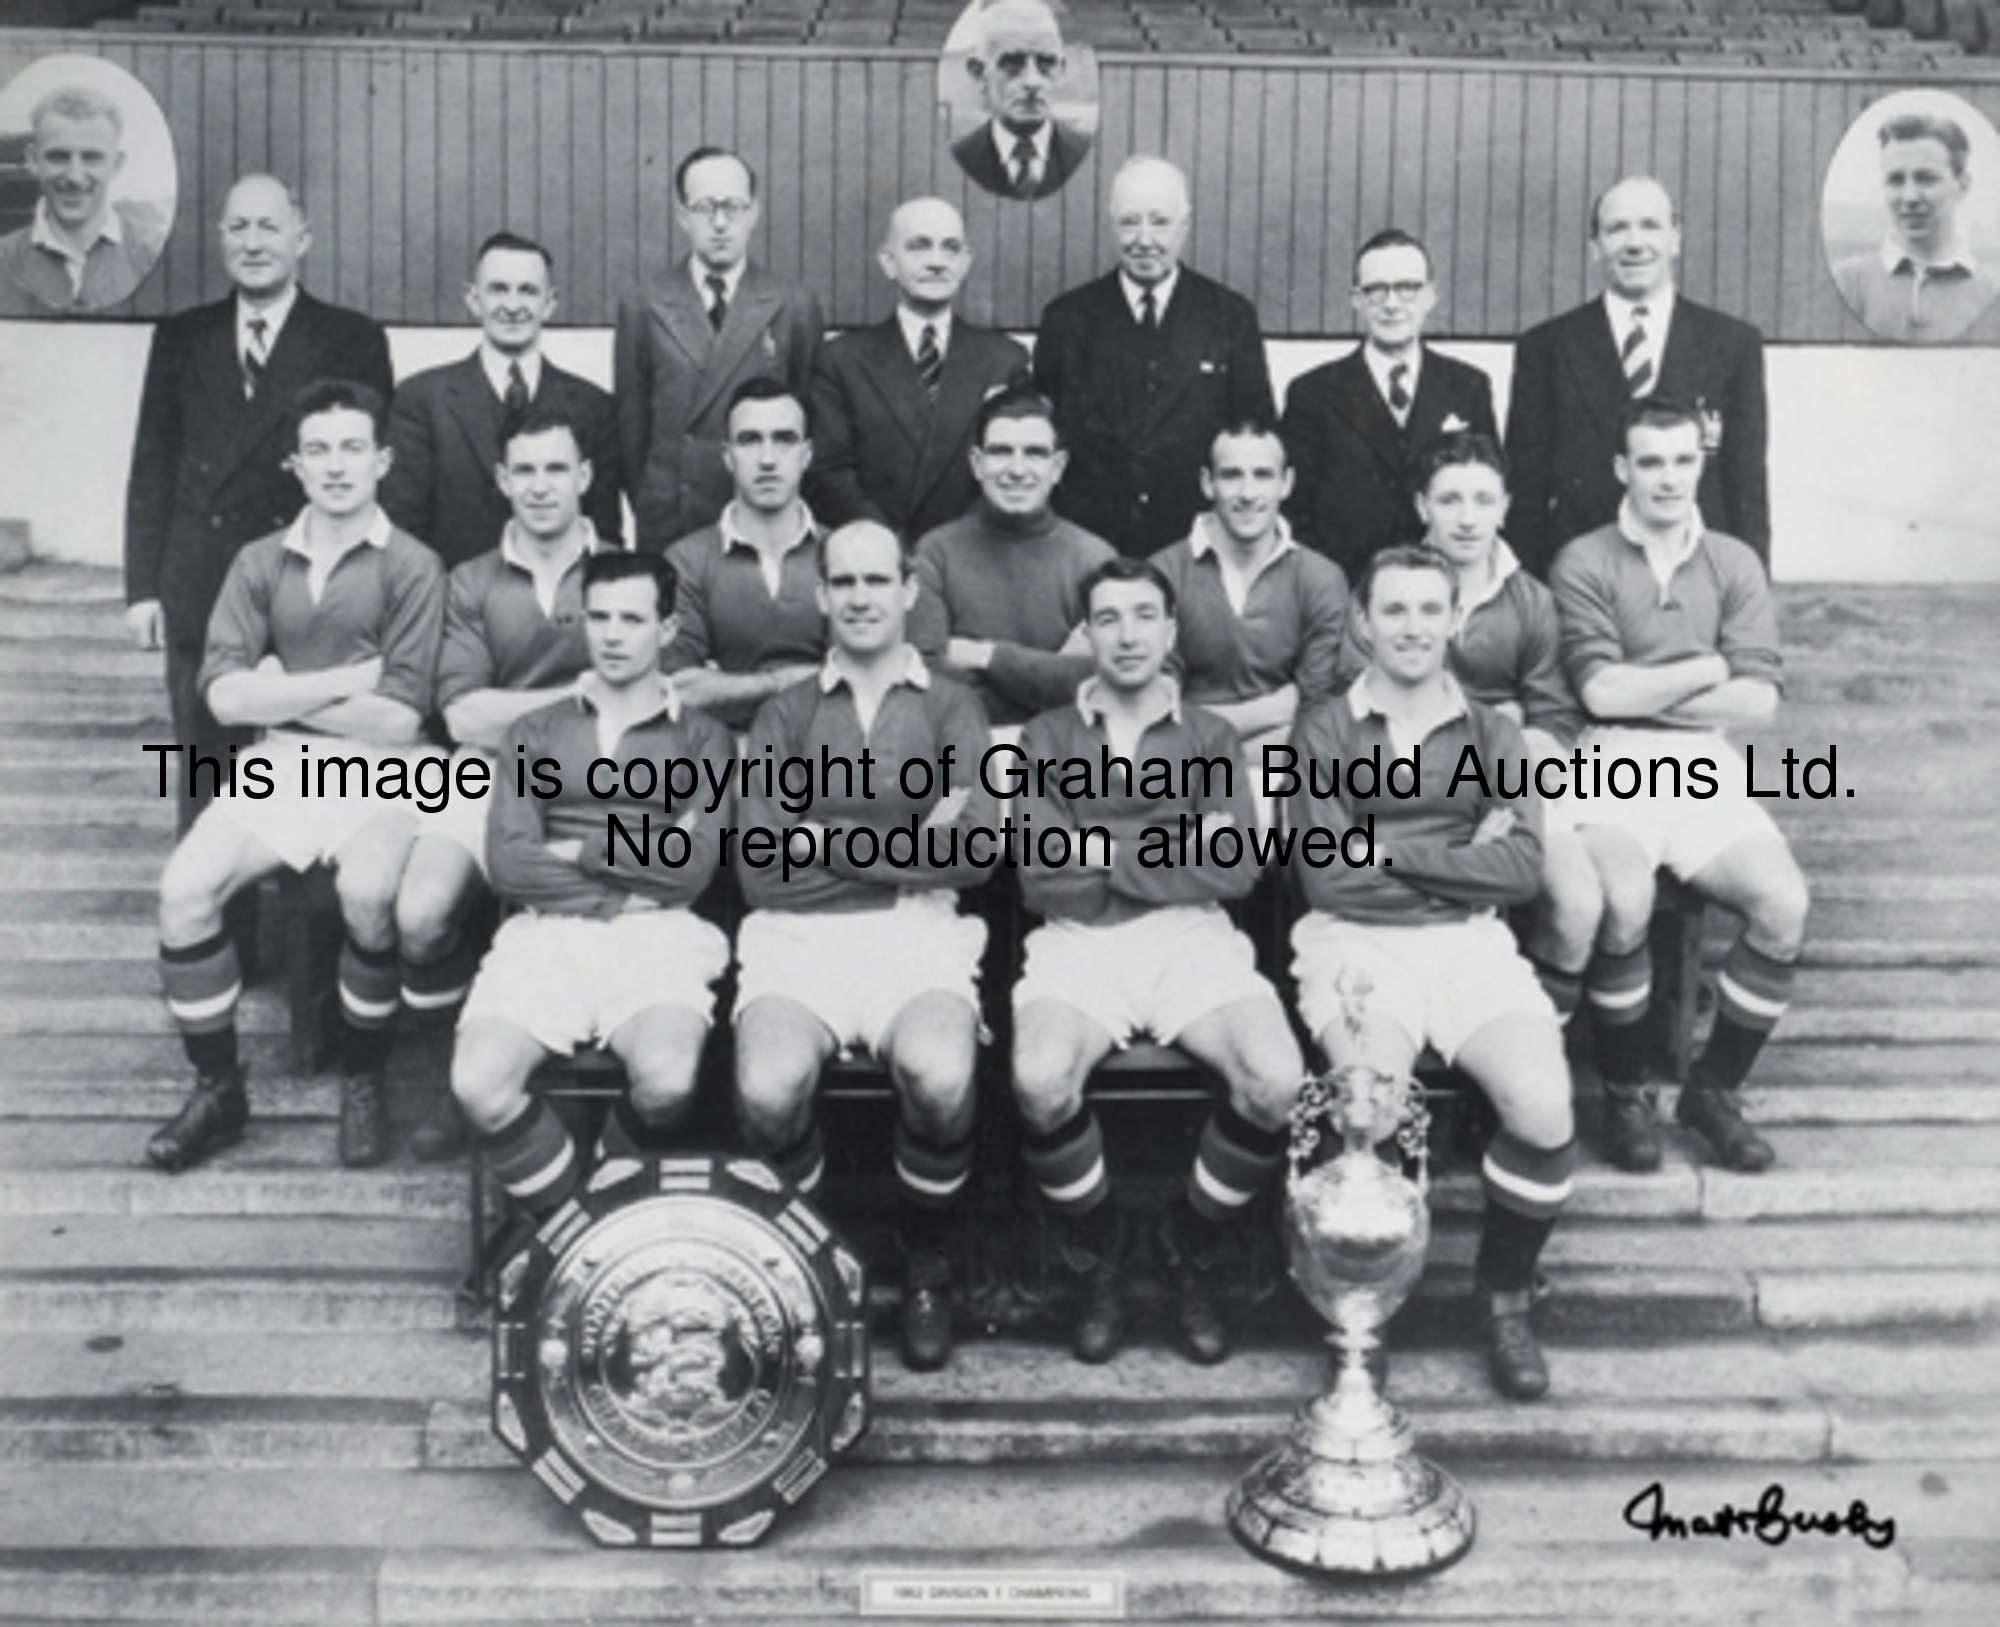 A signed b&w photograph of the Manchester United 1952 Championship winning team signed by Matt Busby...